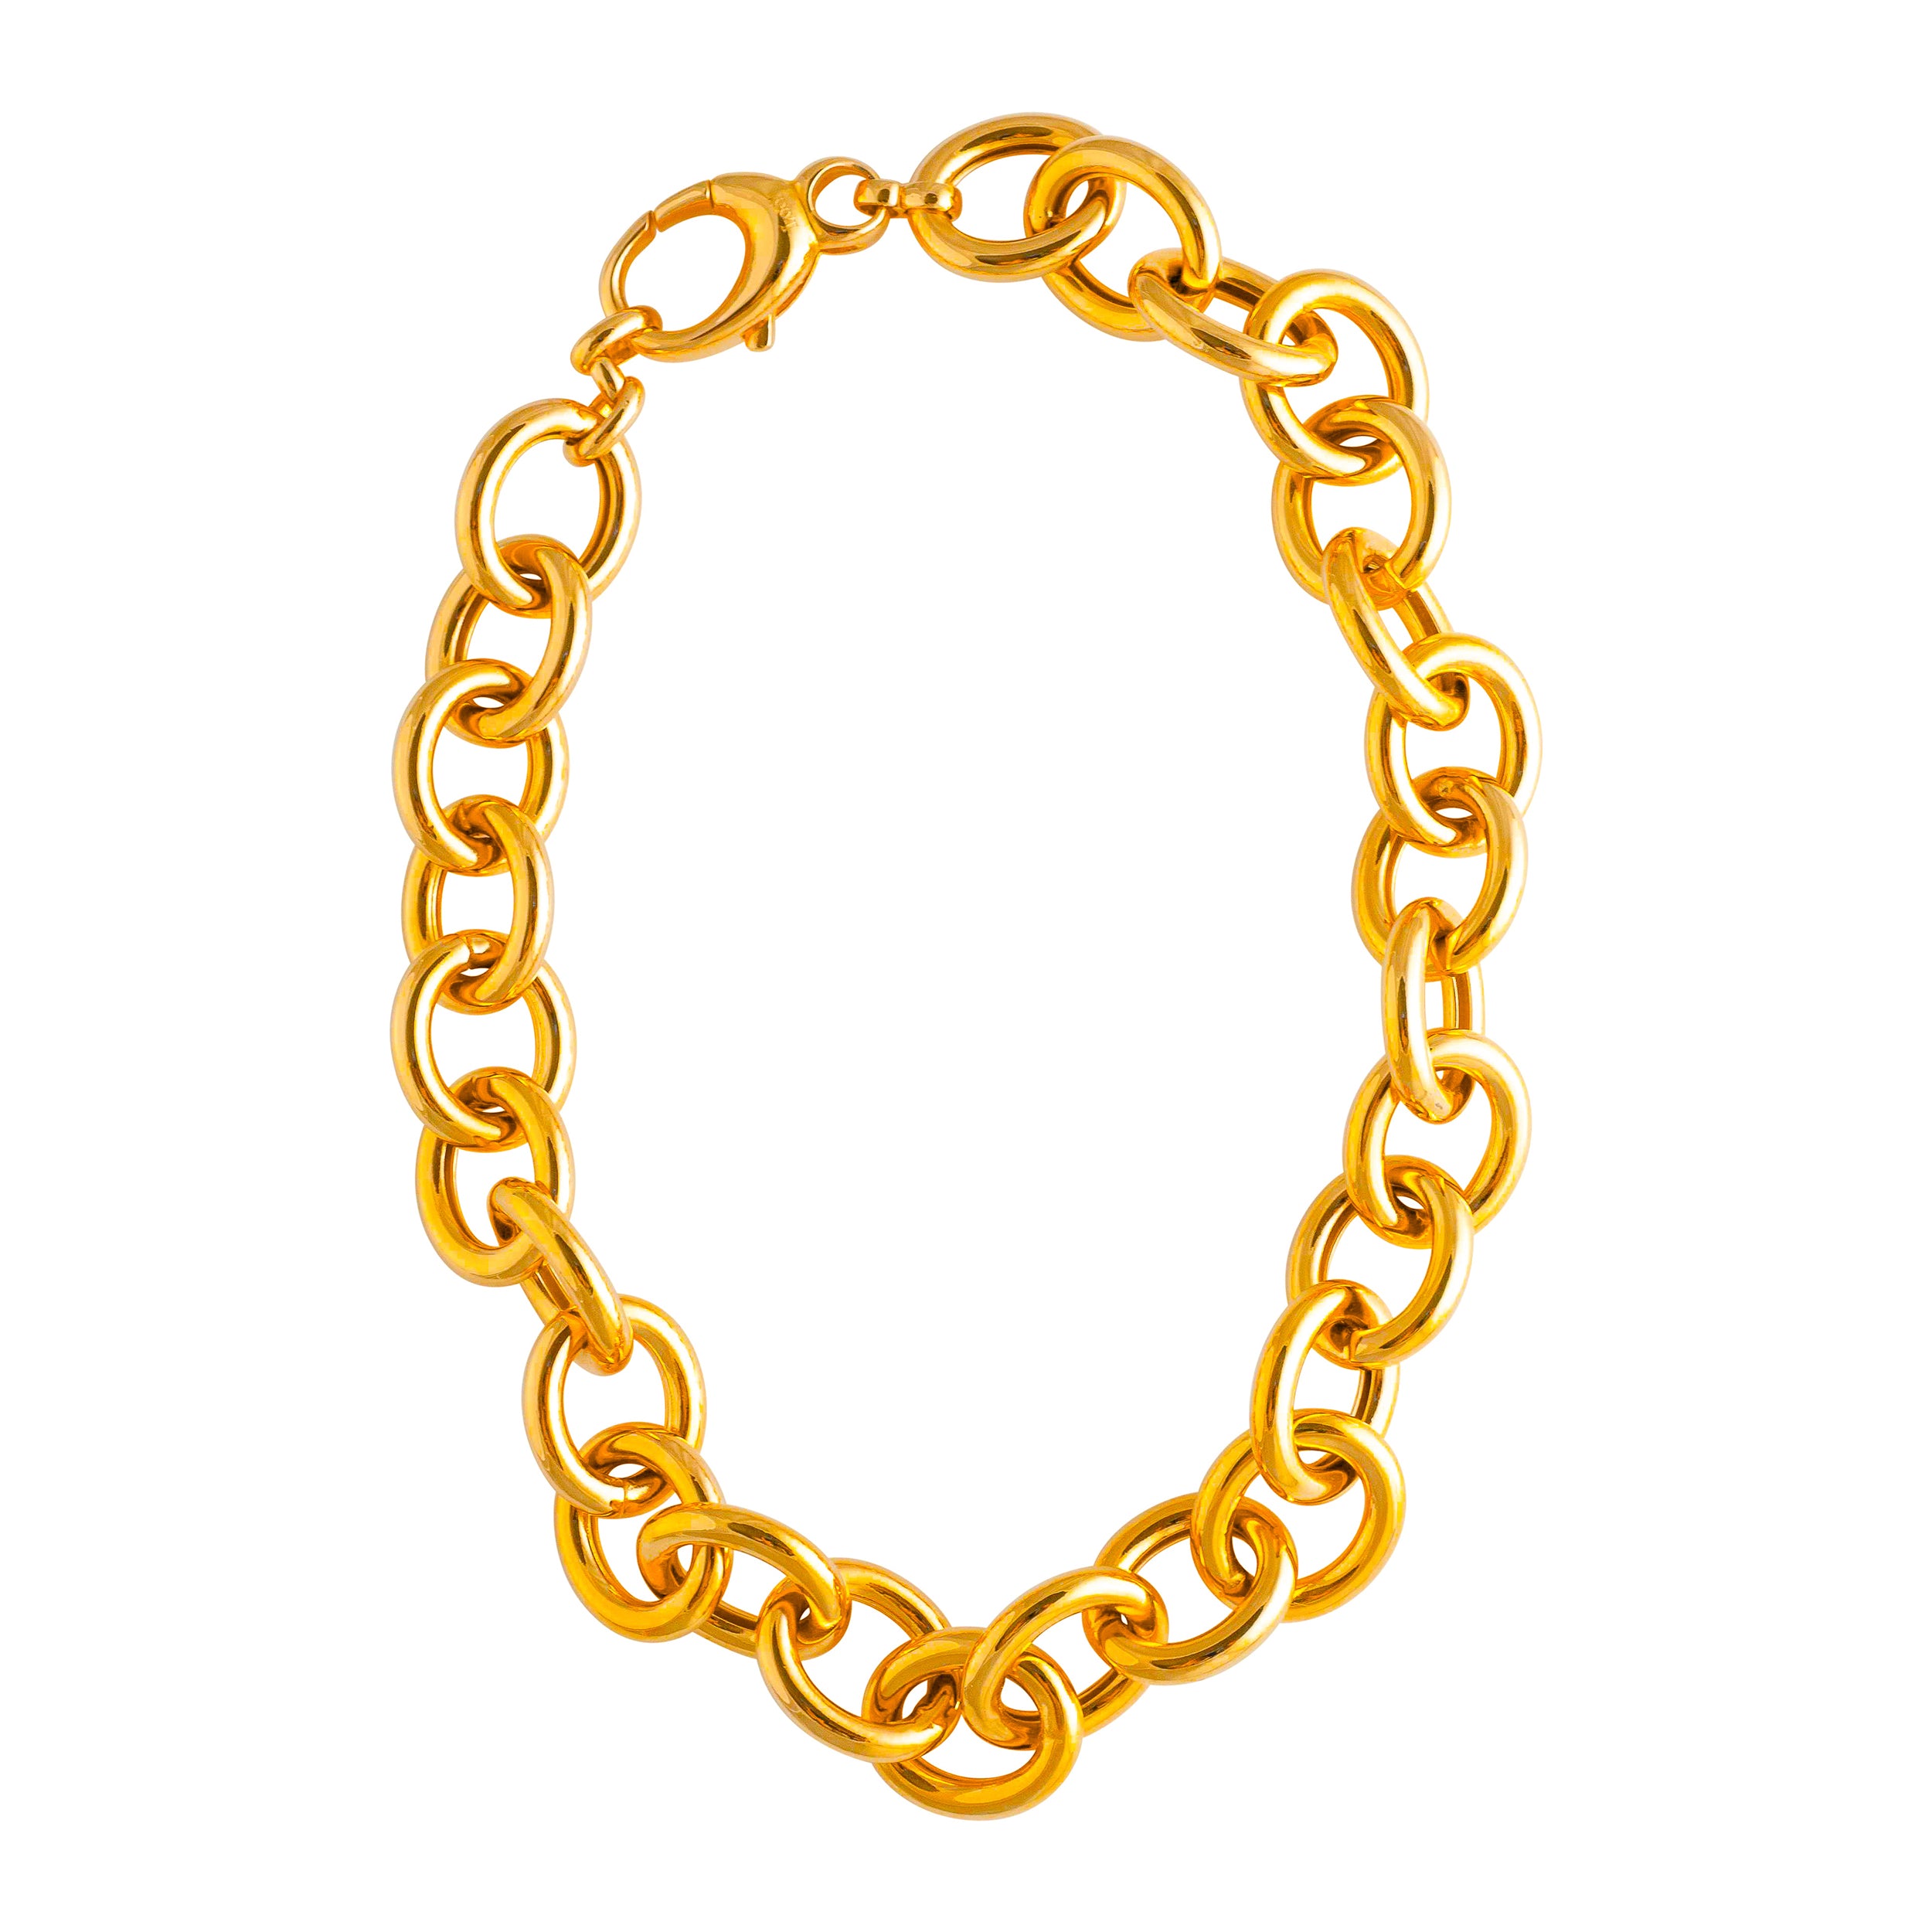 LARGE GOLD THICK CHAIN NECKLACE